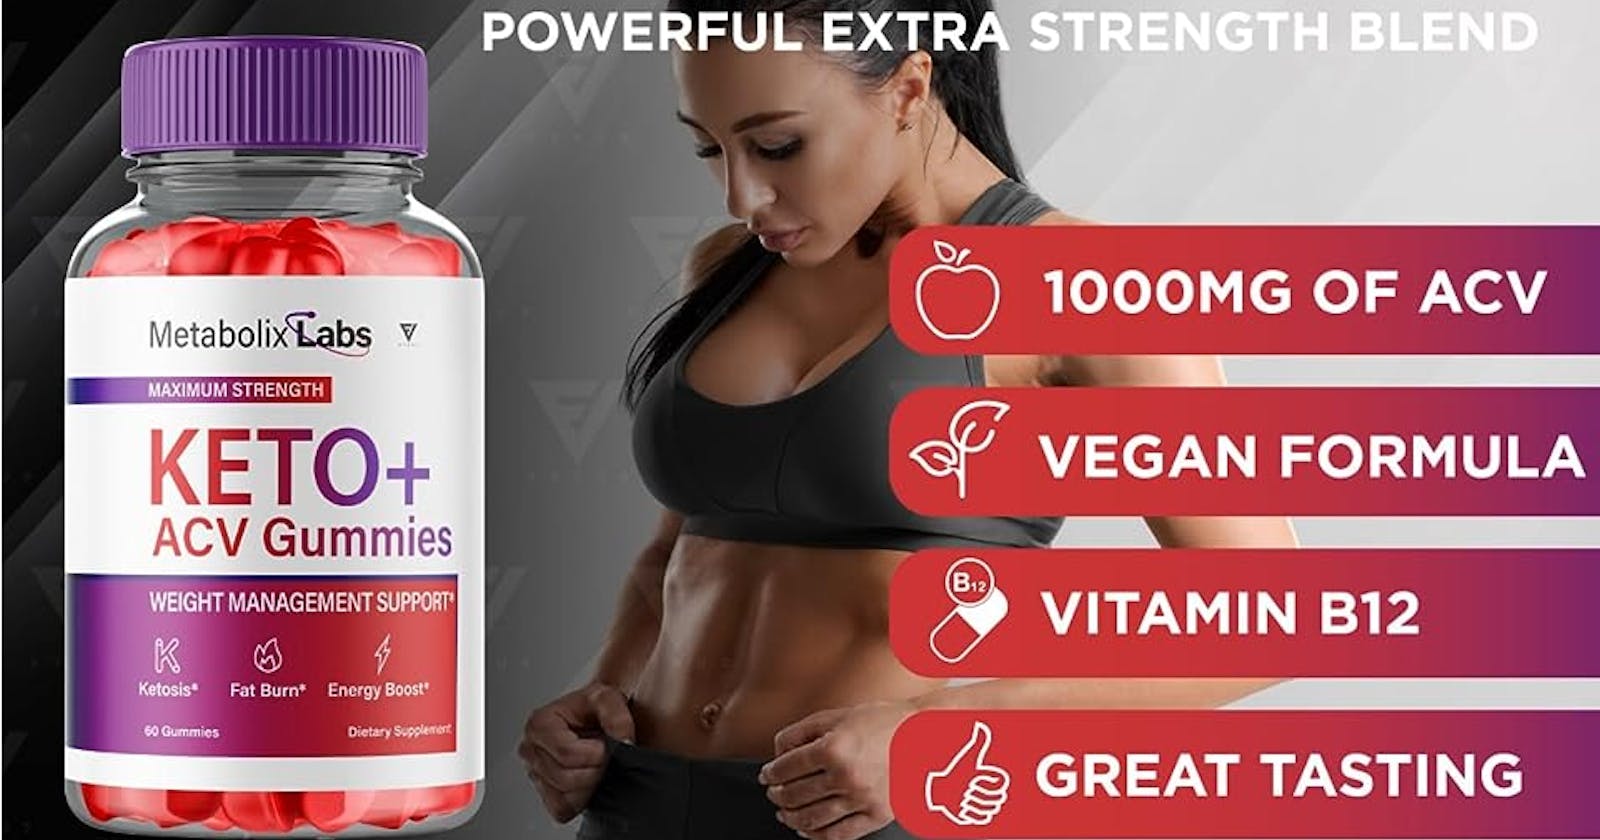 Metabolix Labs Keto ACV Gummies – Effective Ingredients For Losing Weight Without Side Effects!